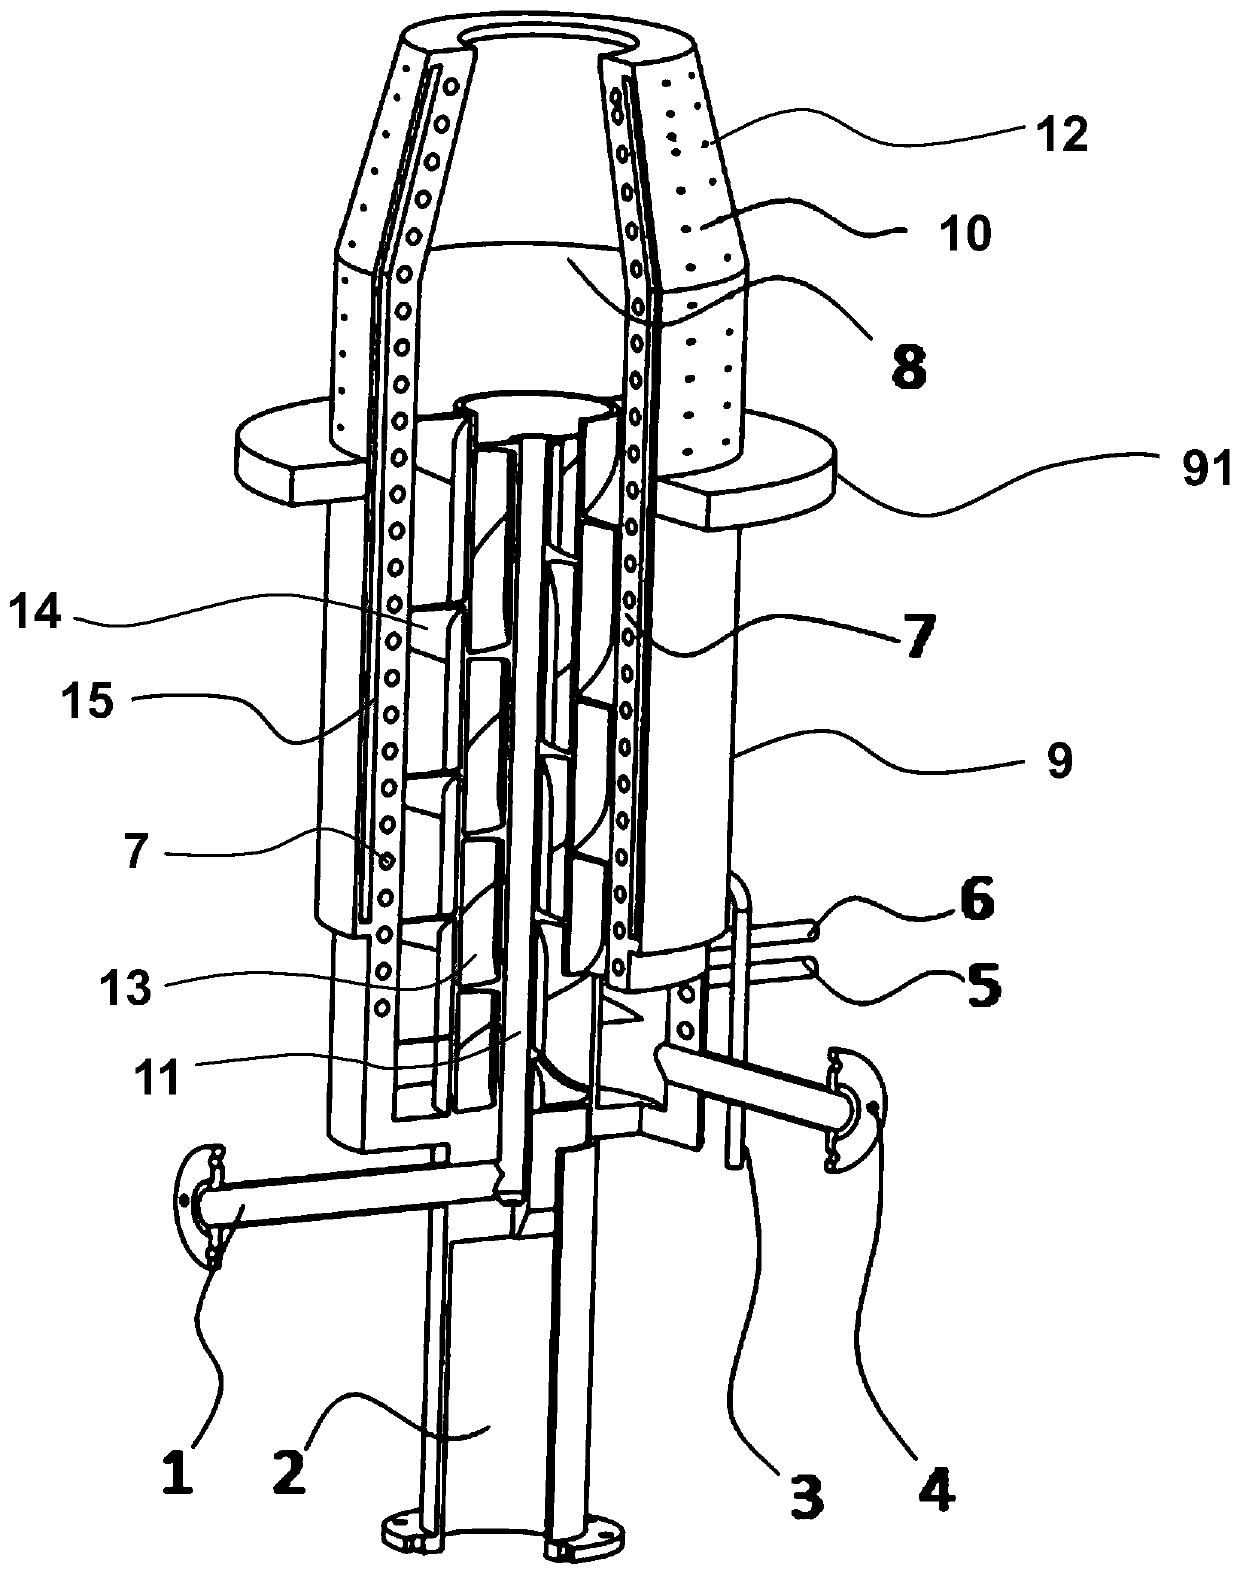 Gasifier burner structure with spiral flow channel